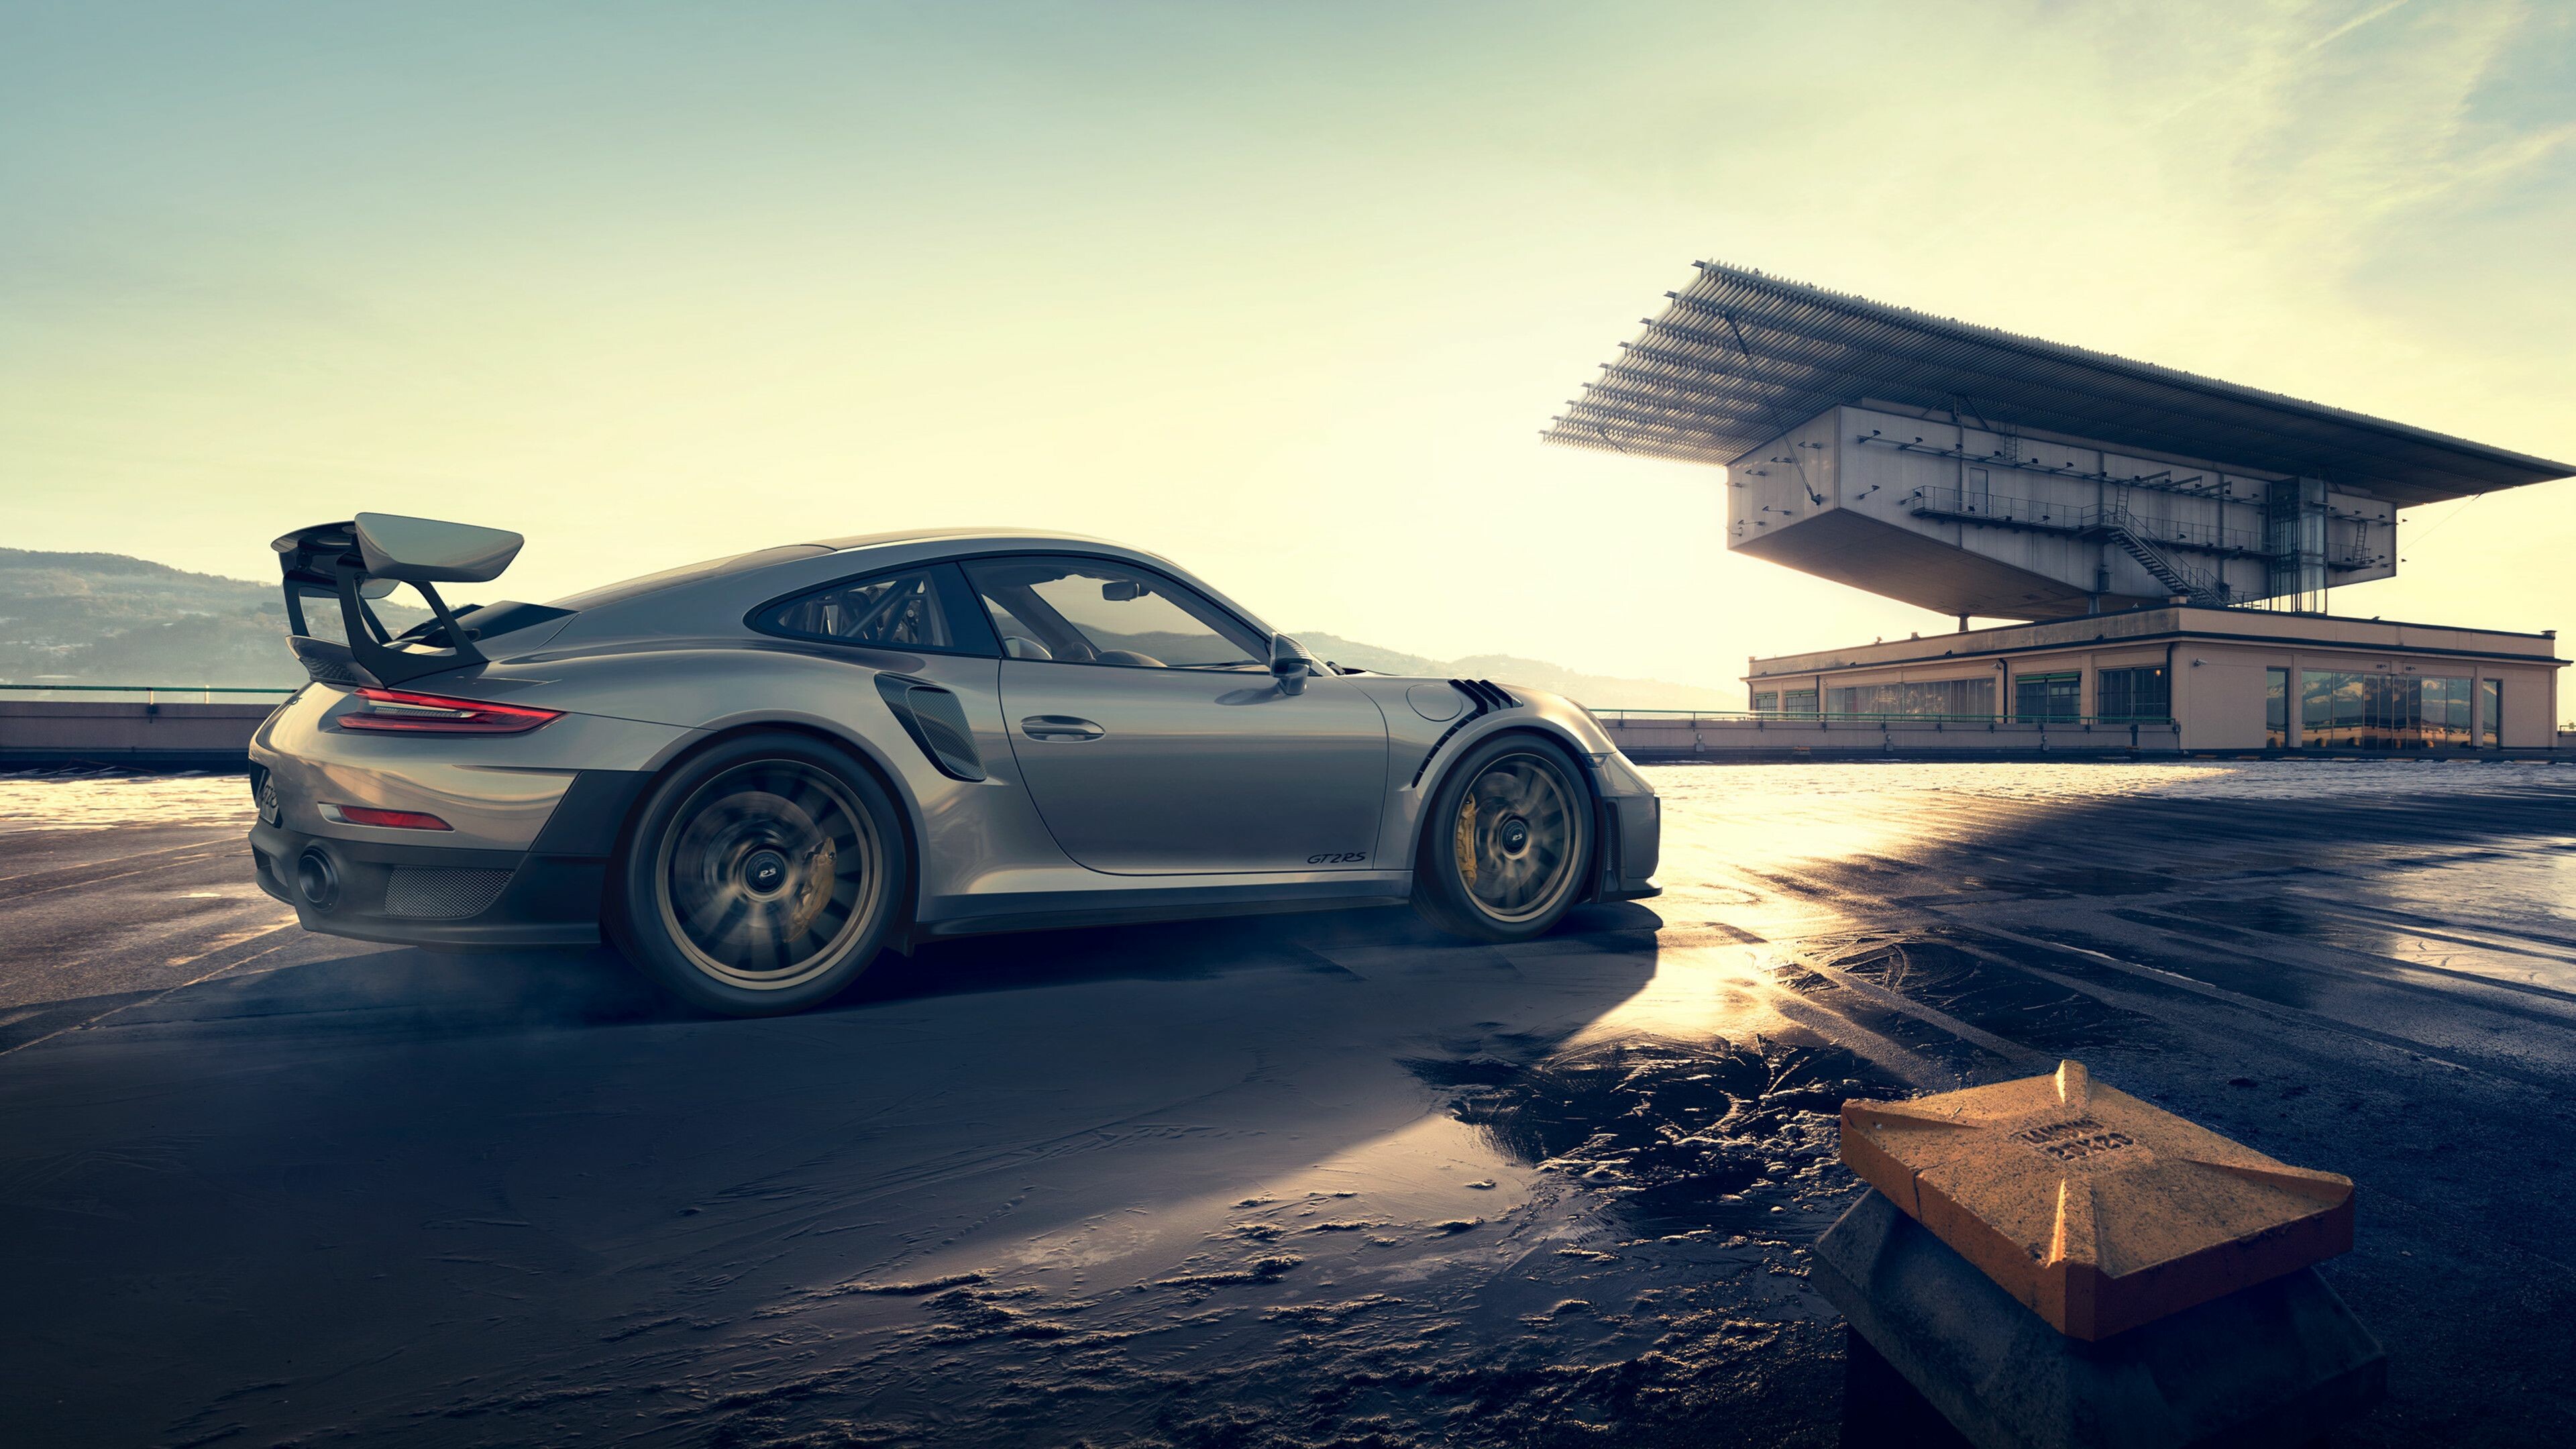 Porsche: GT2, It is based on the 911 Turbo, and uses a similar twin-turbocharged engine, but features numerous upgrades, including engine enhancements, larger brakes, and stiffer suspension calibration. 3840x2160 4K Wallpaper.